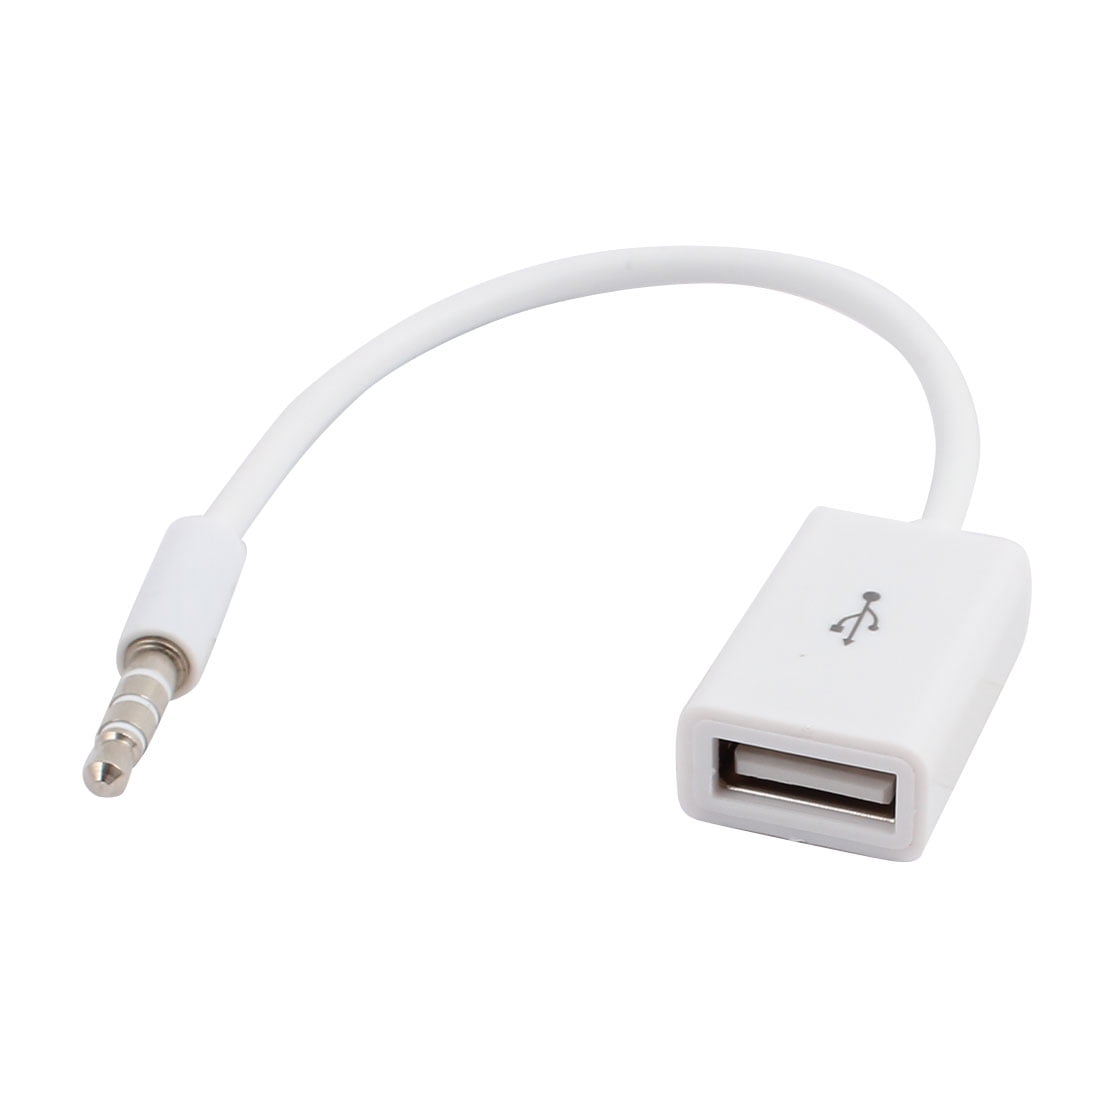 AUX Jack Audio Input Cord Cable Car MP3 3.5mm Male To USB Port Converter Adapter 